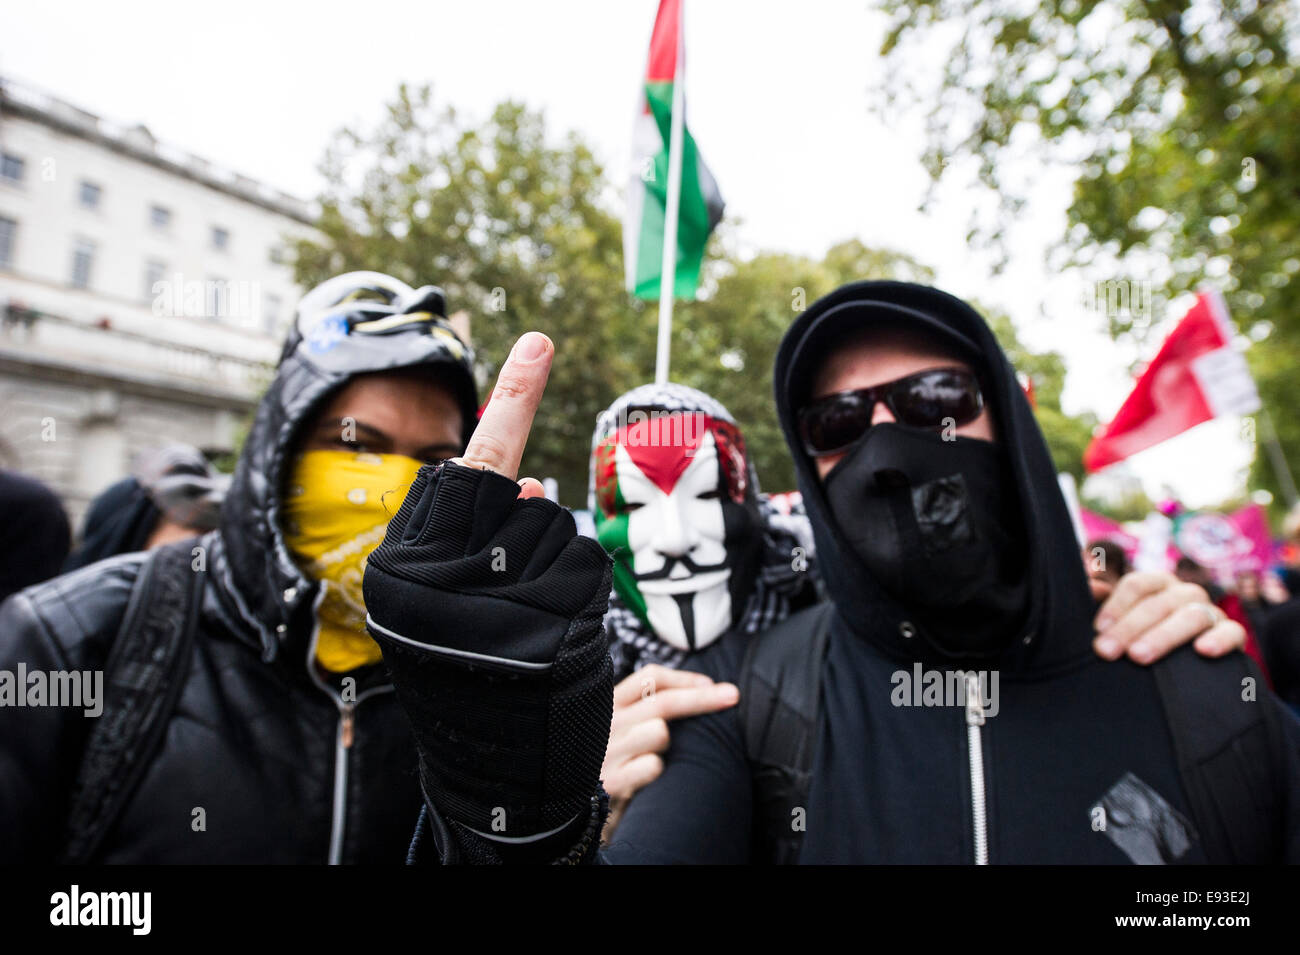 London, UK. 18 October 2014. 'Britain Needs A Payrise'   A TUC national demonstration in Central London.  A gesture made by a member of Black Bloc as the march prepares to set off from the Embankment. Photo: Gordon Scammell/Alamy Live News Stock Photo